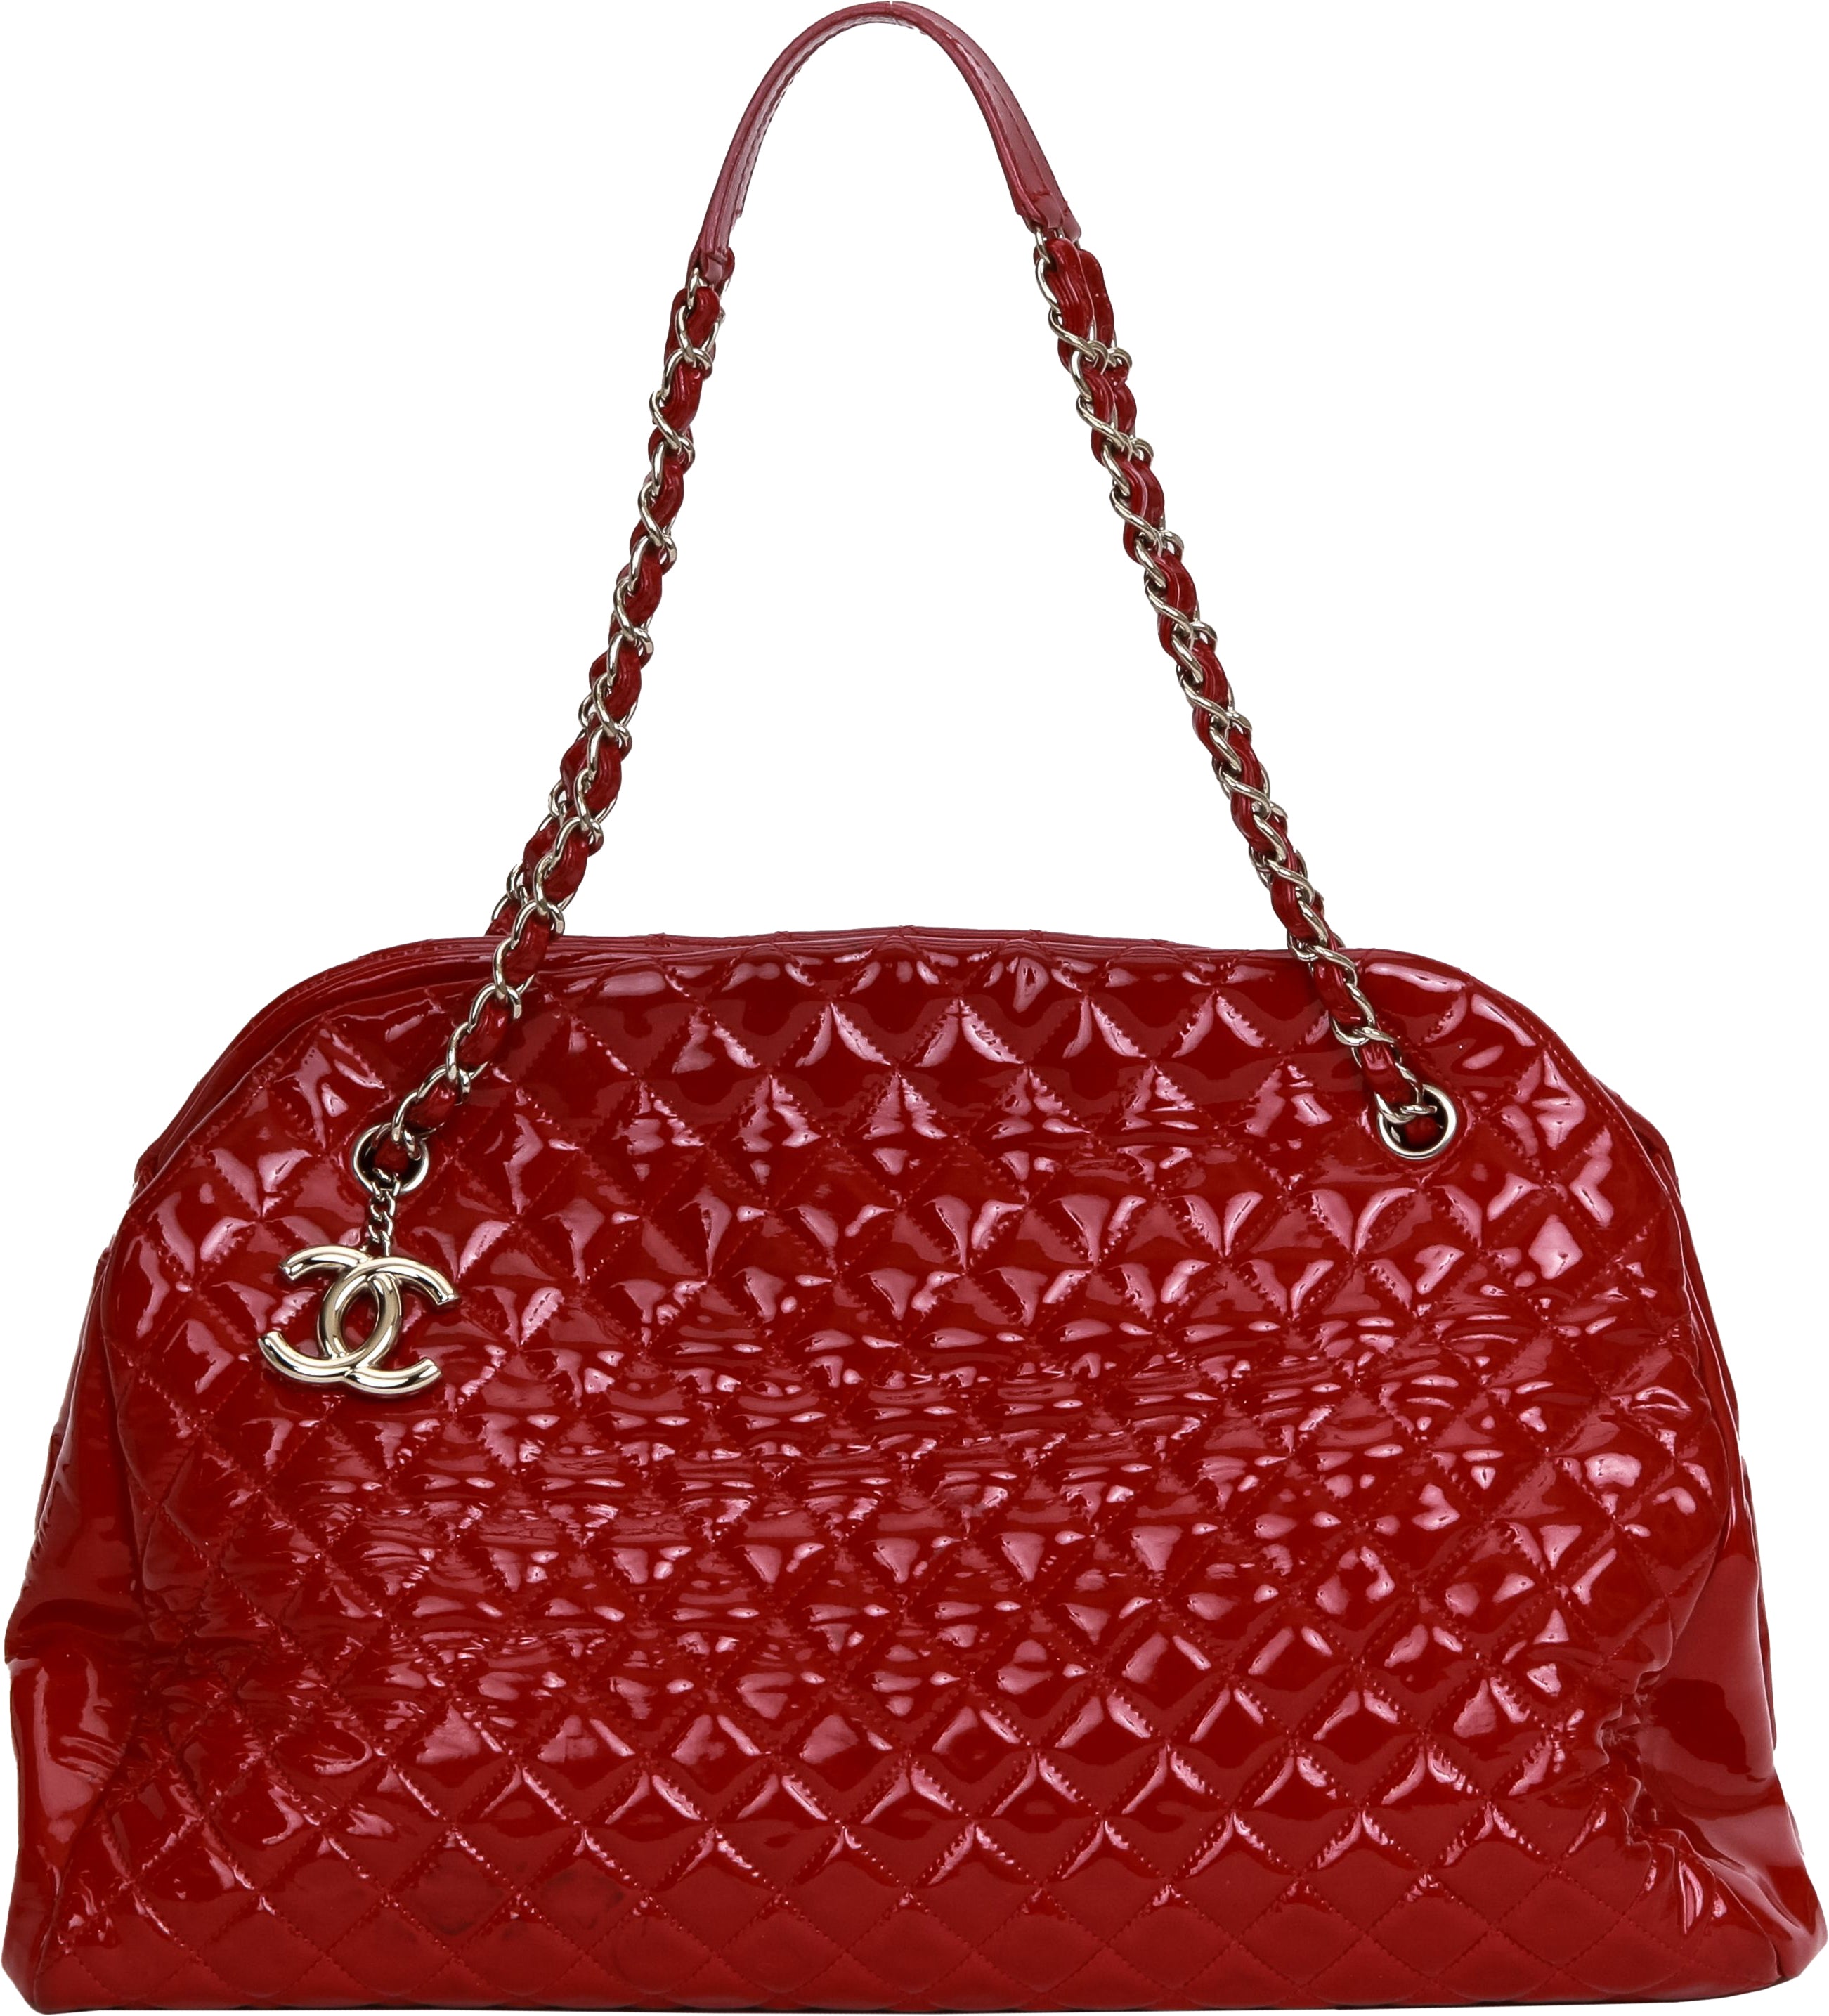 Chanel Golden Class Flap Bag Quilted Lambskin Large Auction